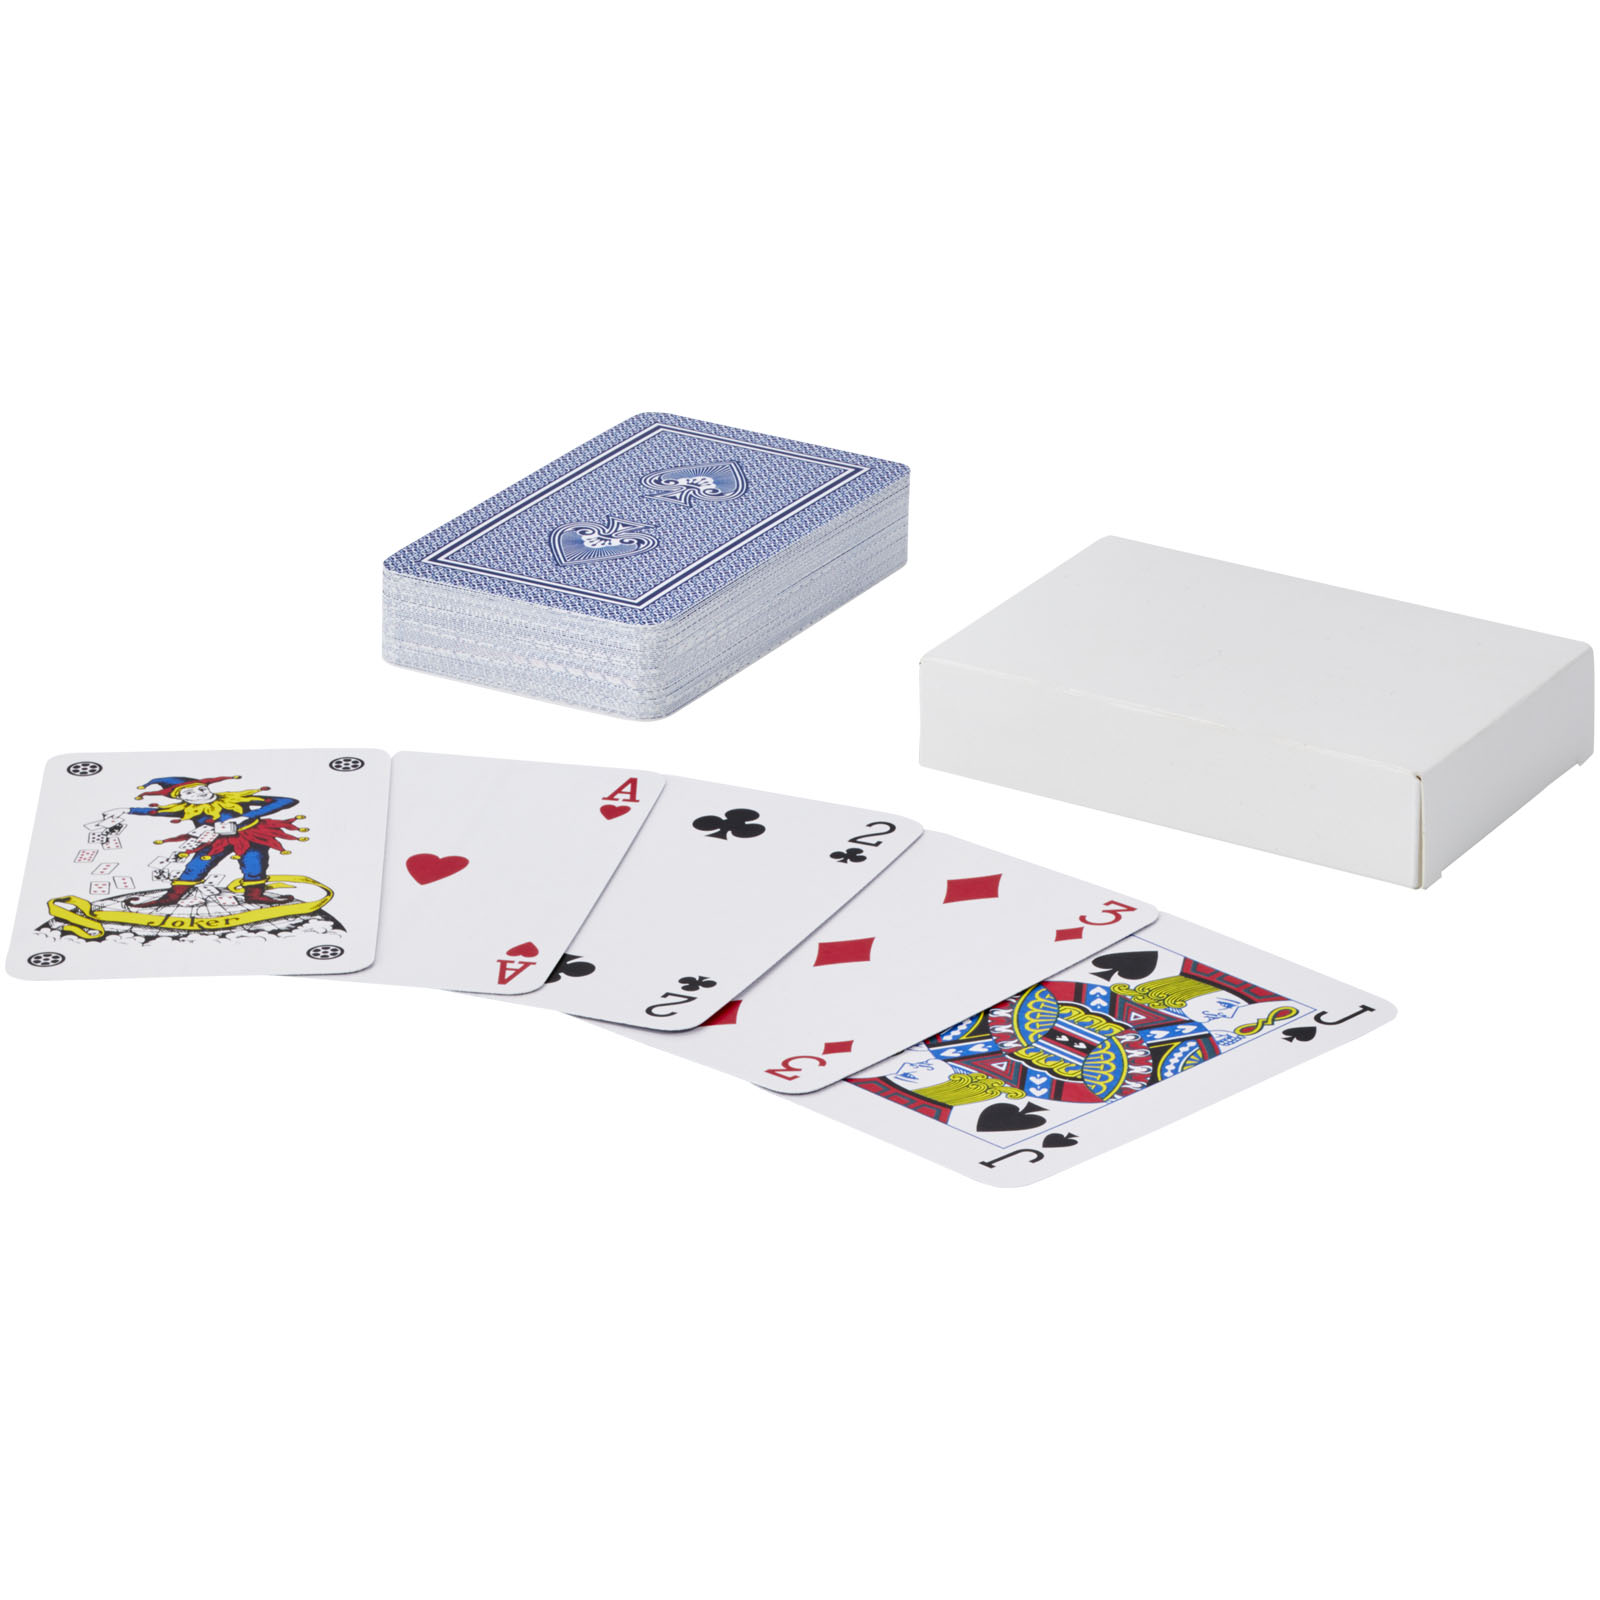 Indoor Games - Ace playing card set